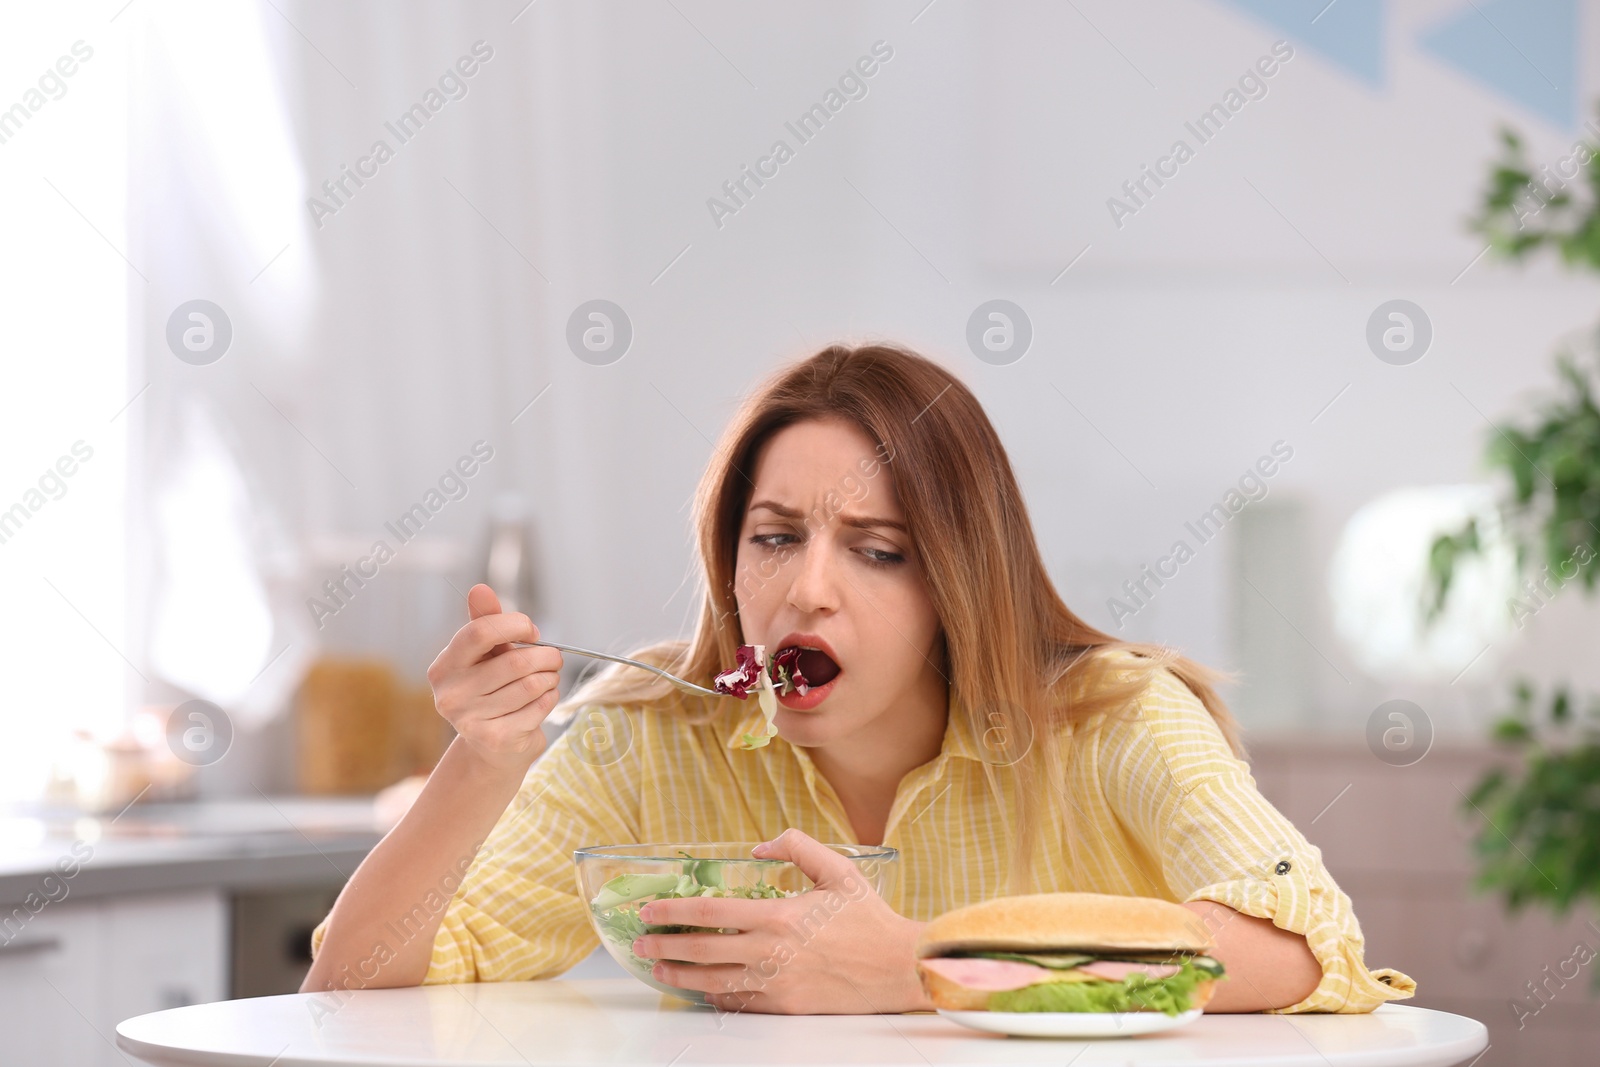 Photo of Emotional young woman eating salad instead of sandwich in kitchen. Healthy diet